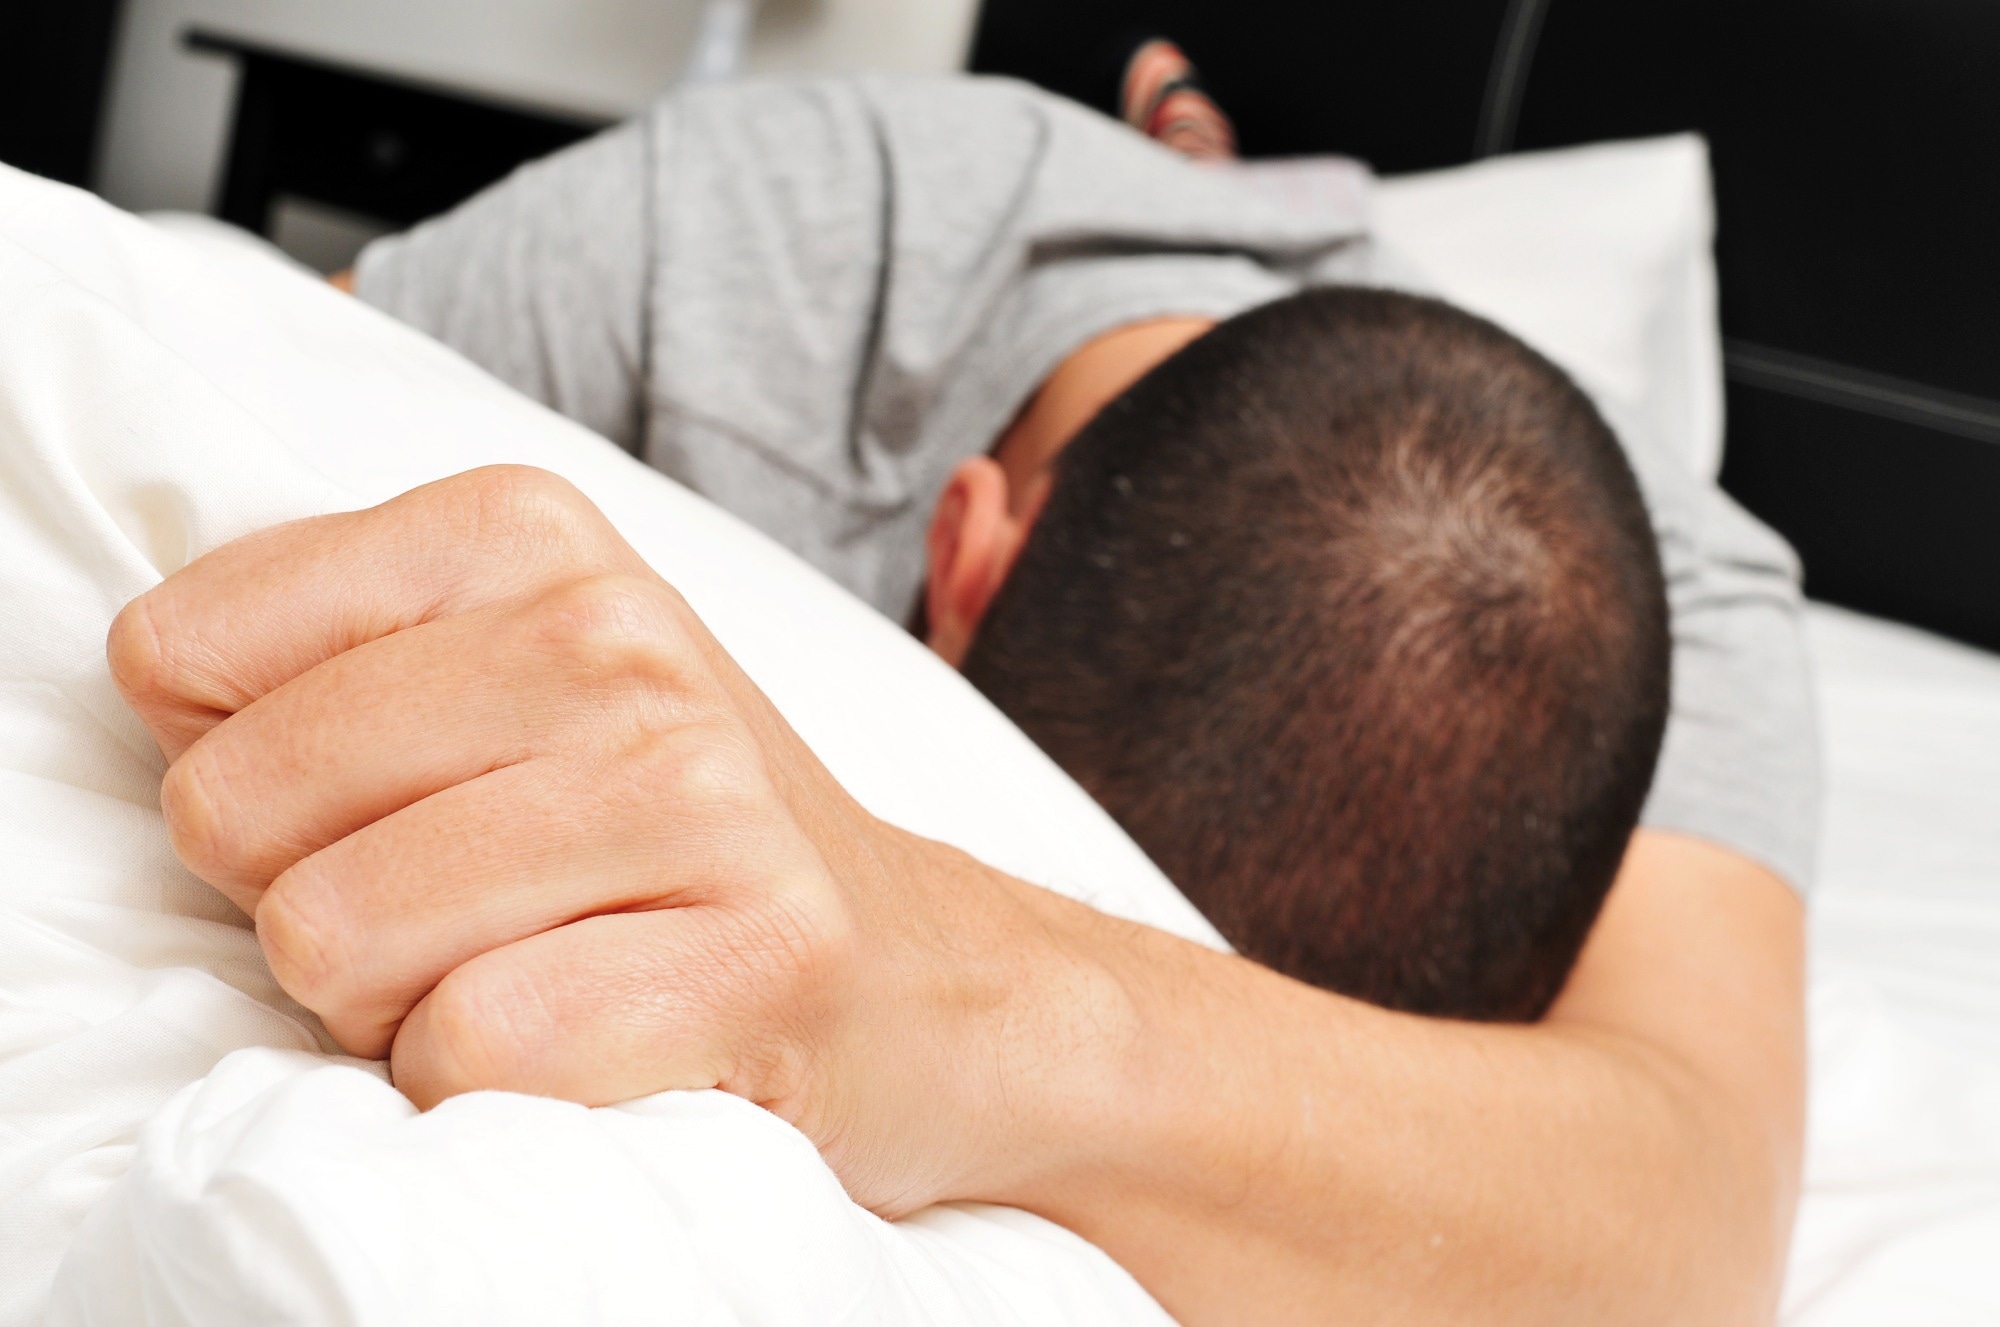 Study: Post orgasmic illness syndrome: a review. Image Credit: nito / Shutterstock